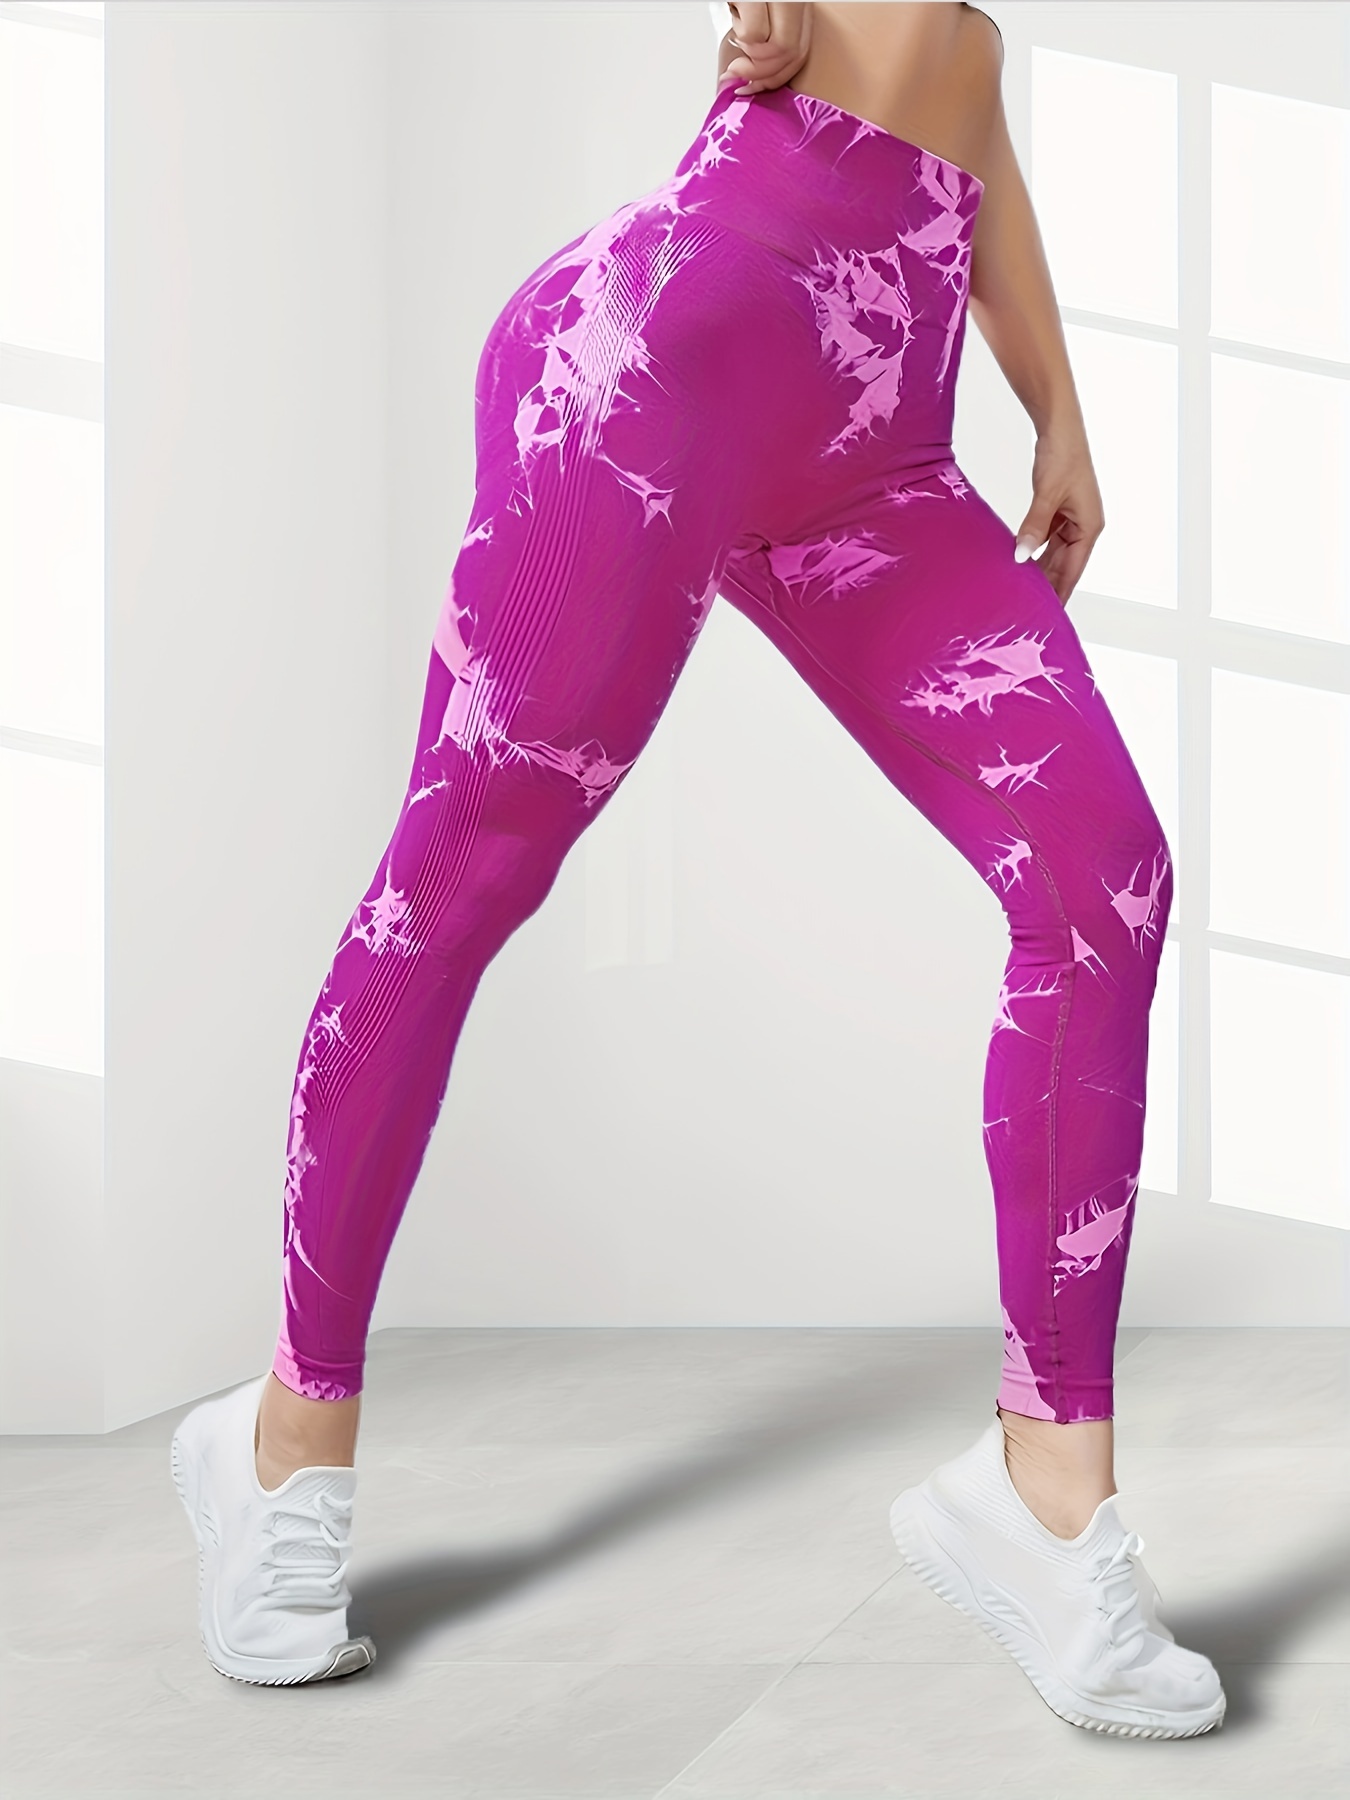 Tie Dye High Stretch Yoga Workout Pants, Fitness Running Sports Leggings, Women's  Activewear, Shop The Latest Trends